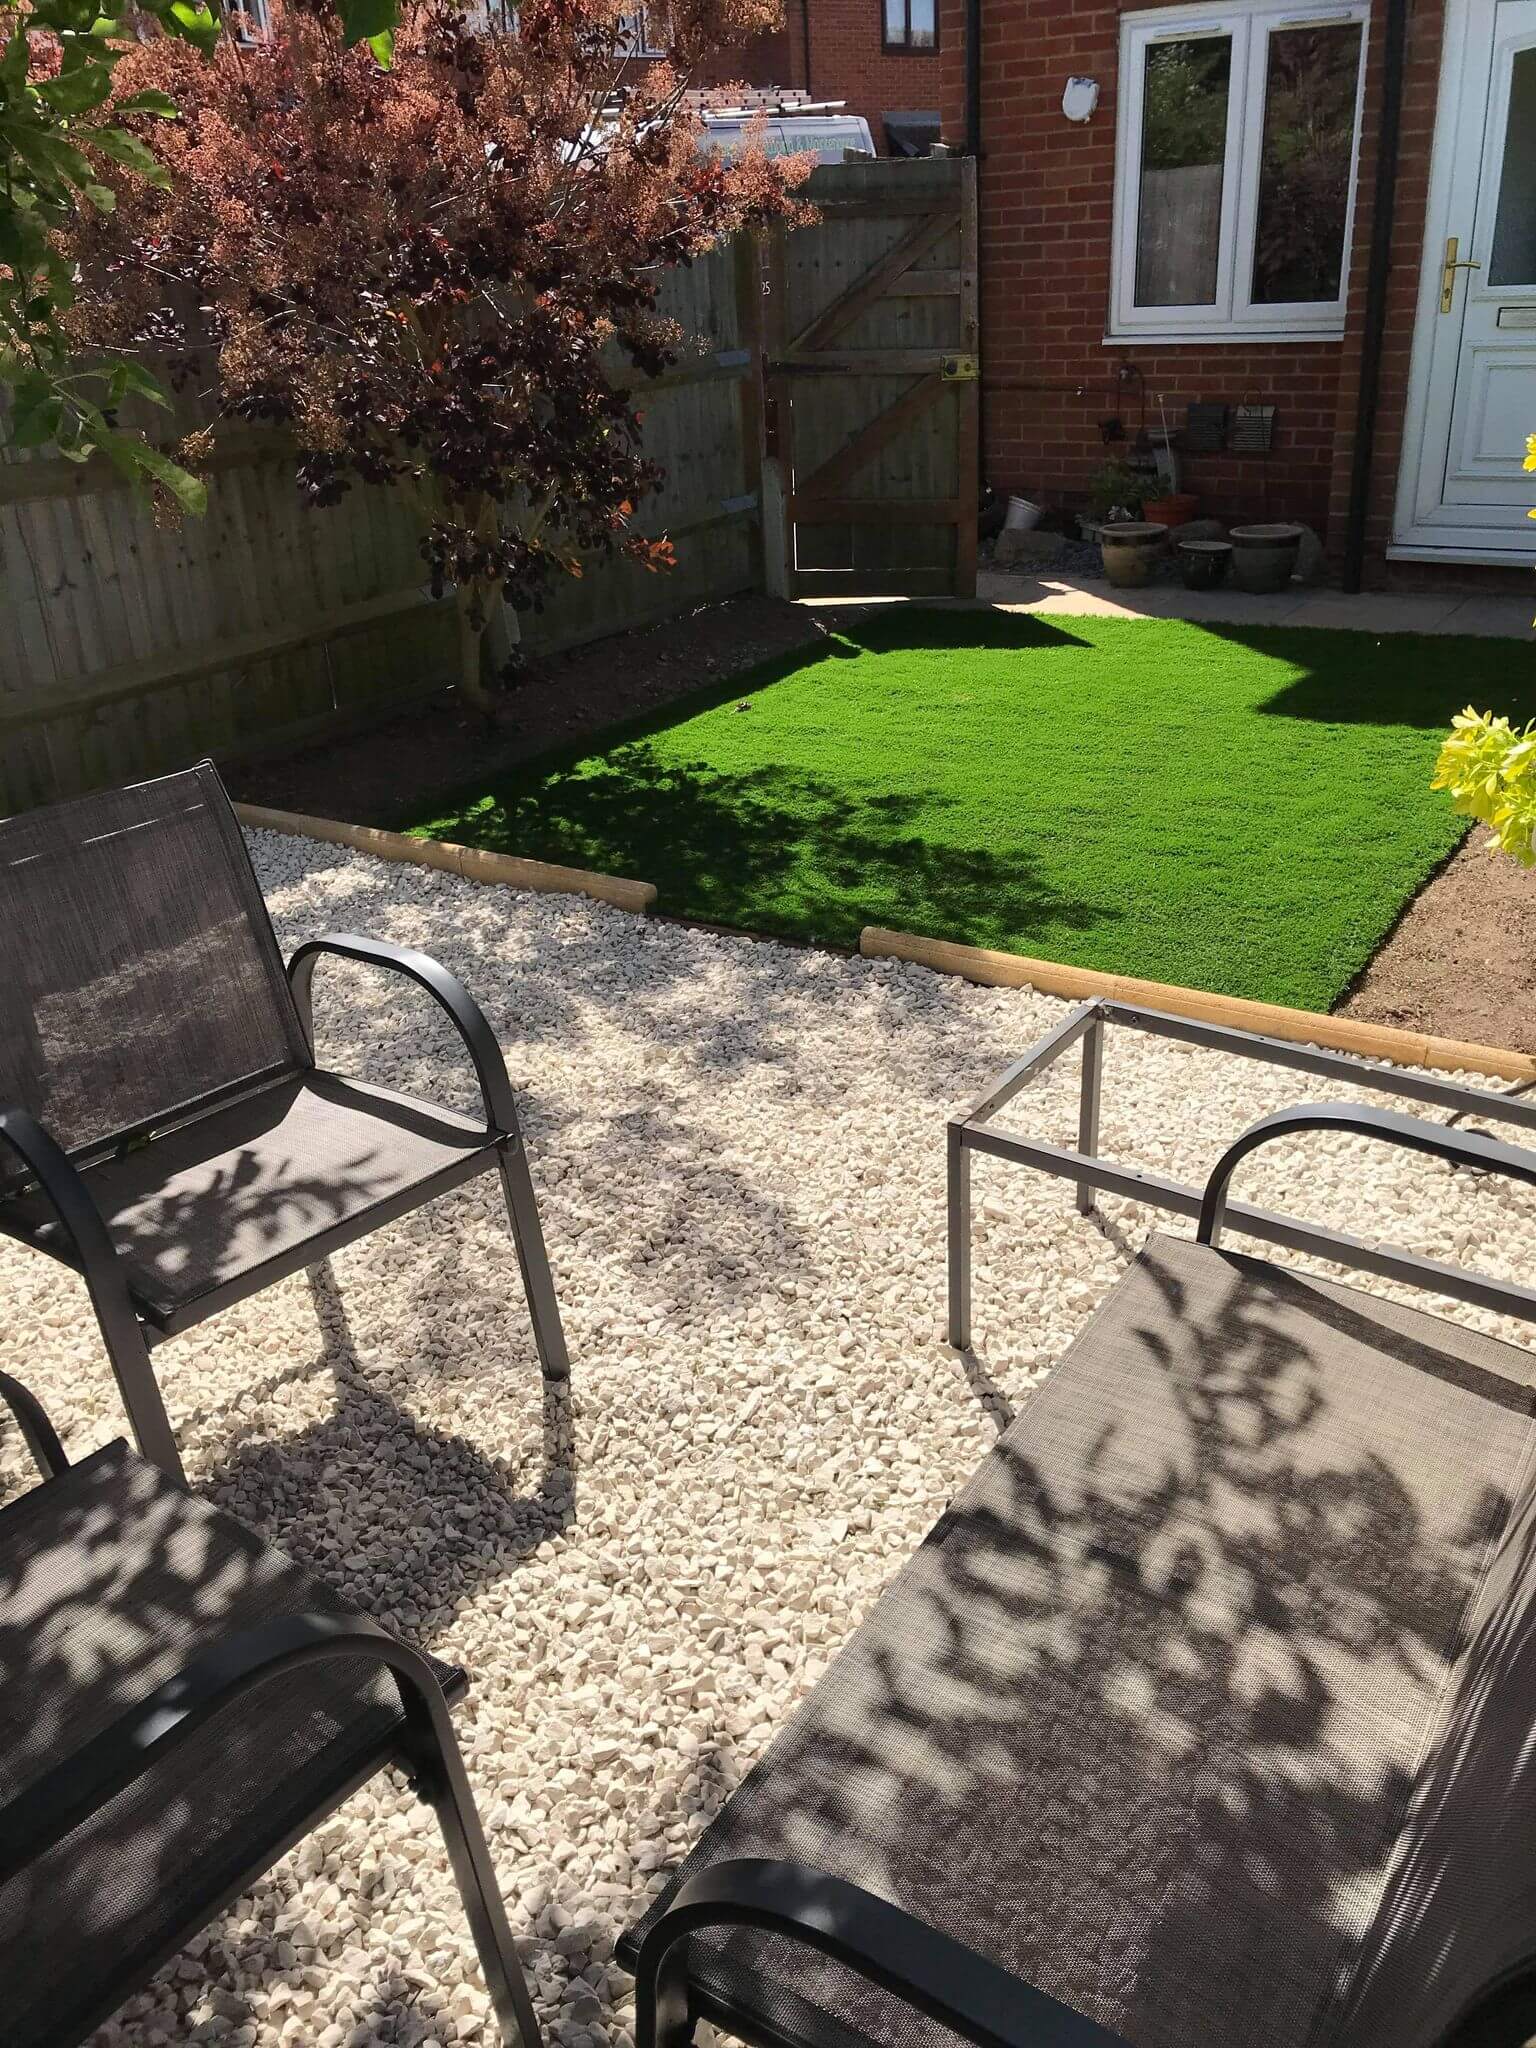 Artifical lawn and gravel sitting area